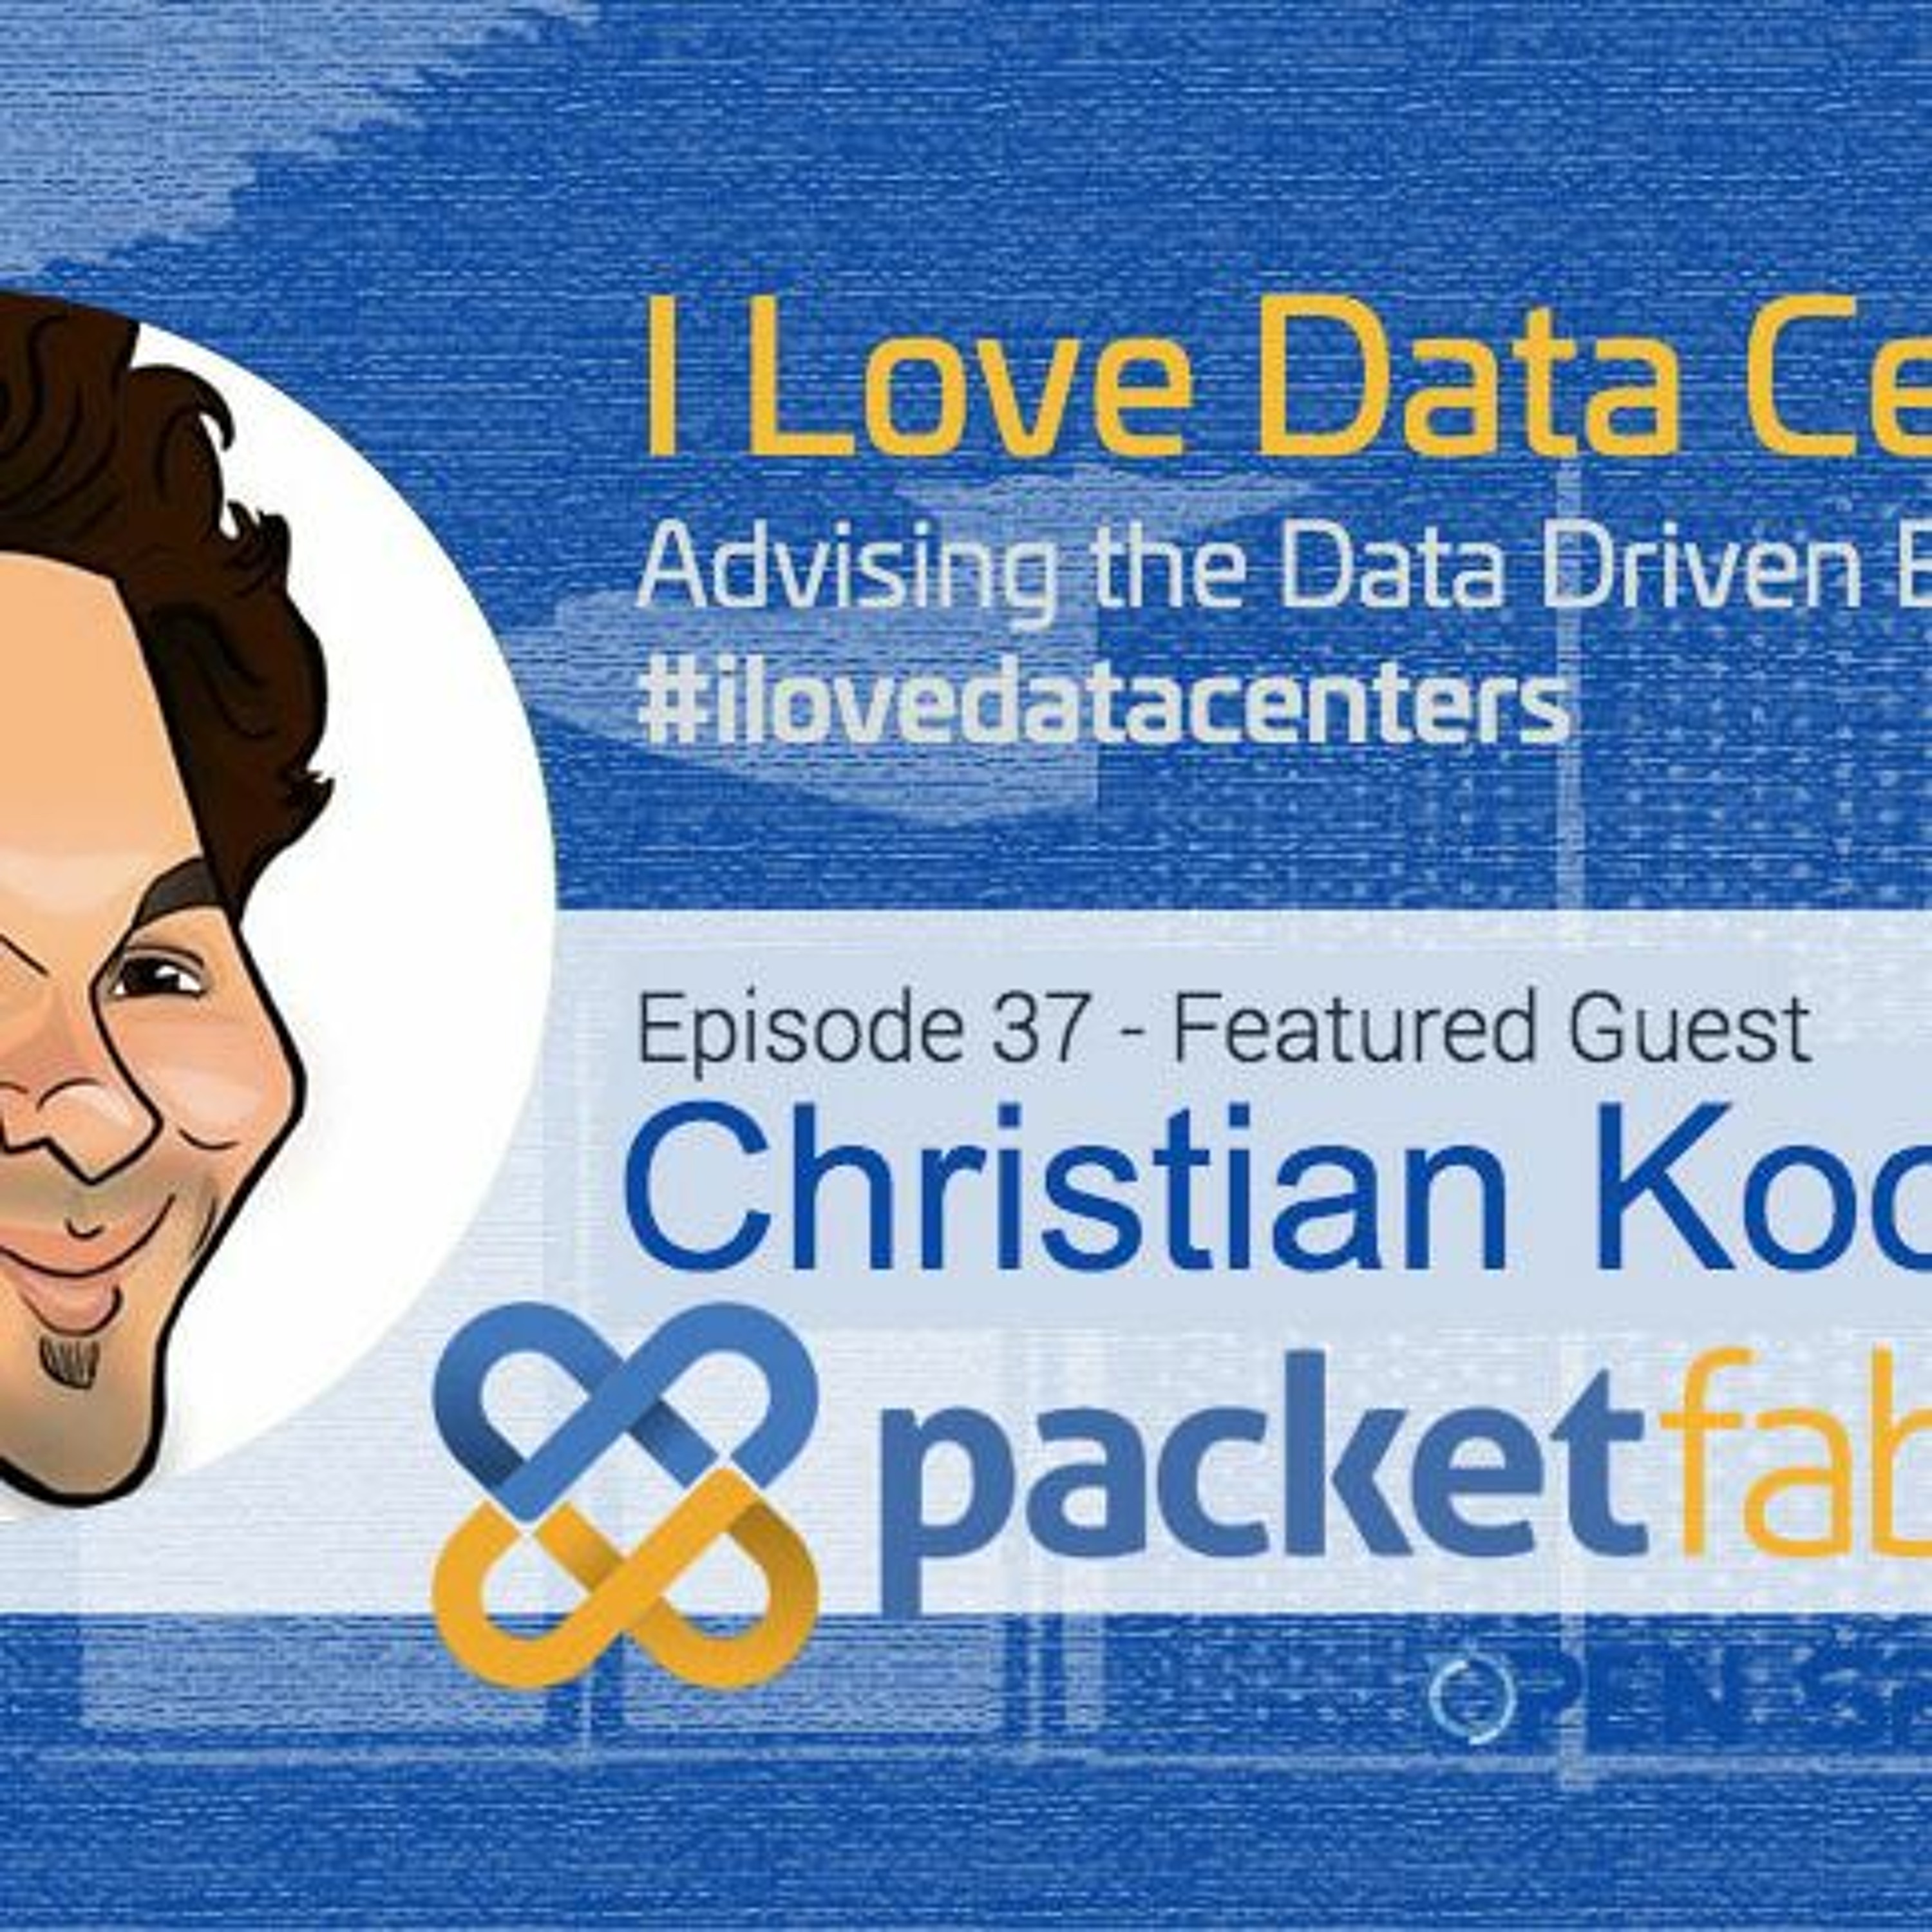 All Things Data Center Interconnection - Episode 037 - ChristianKoch